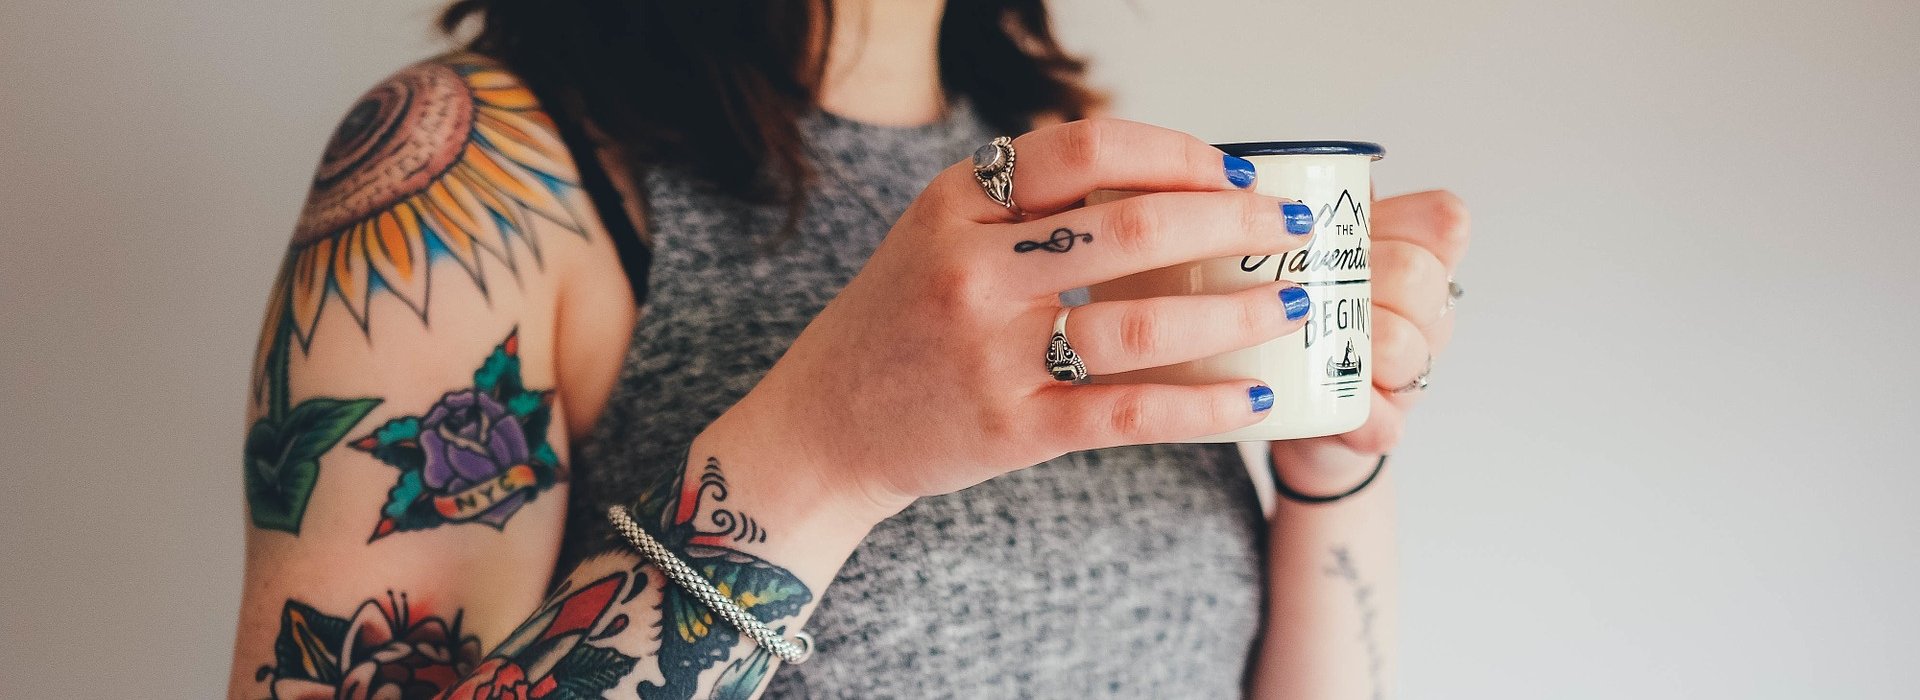 75 Stunning Arm Tattoos For Women with Meaning